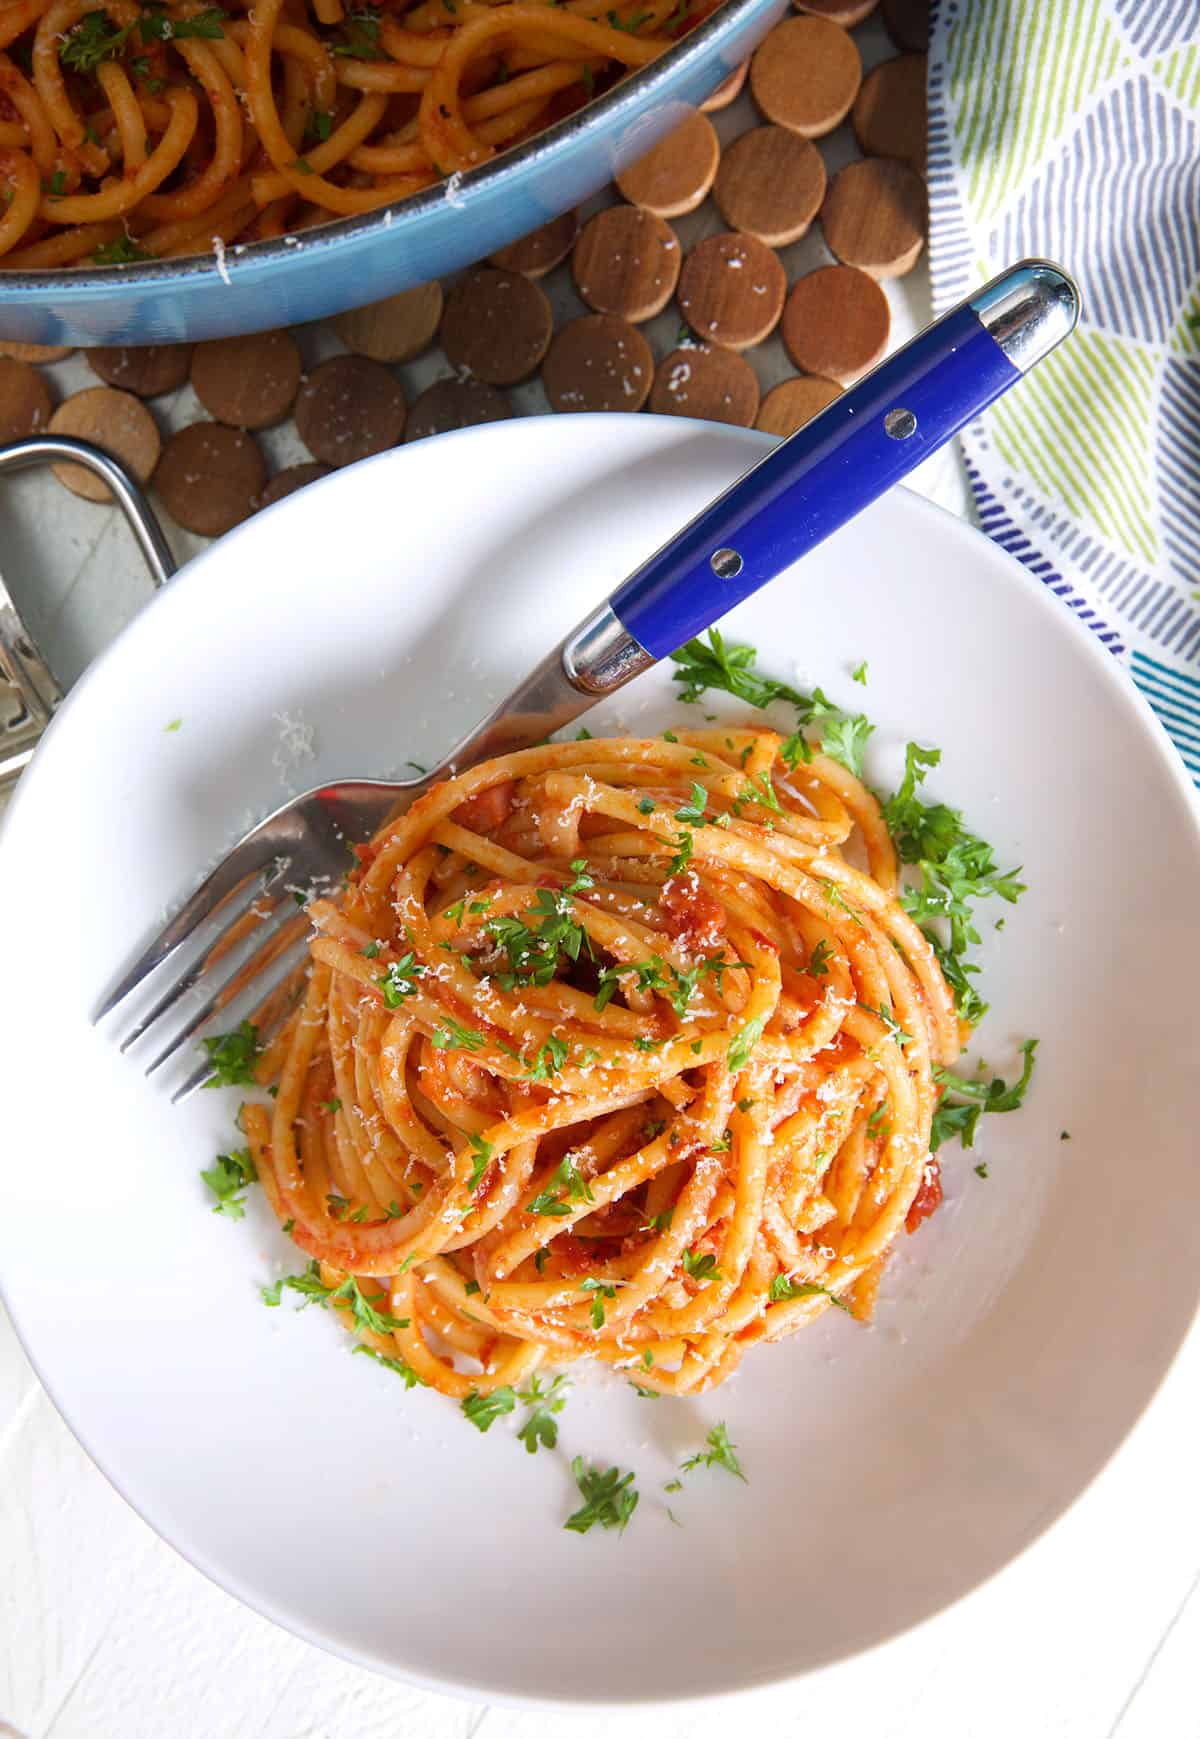 A serving of pasta with red sauce is garnished with fresh parsley.